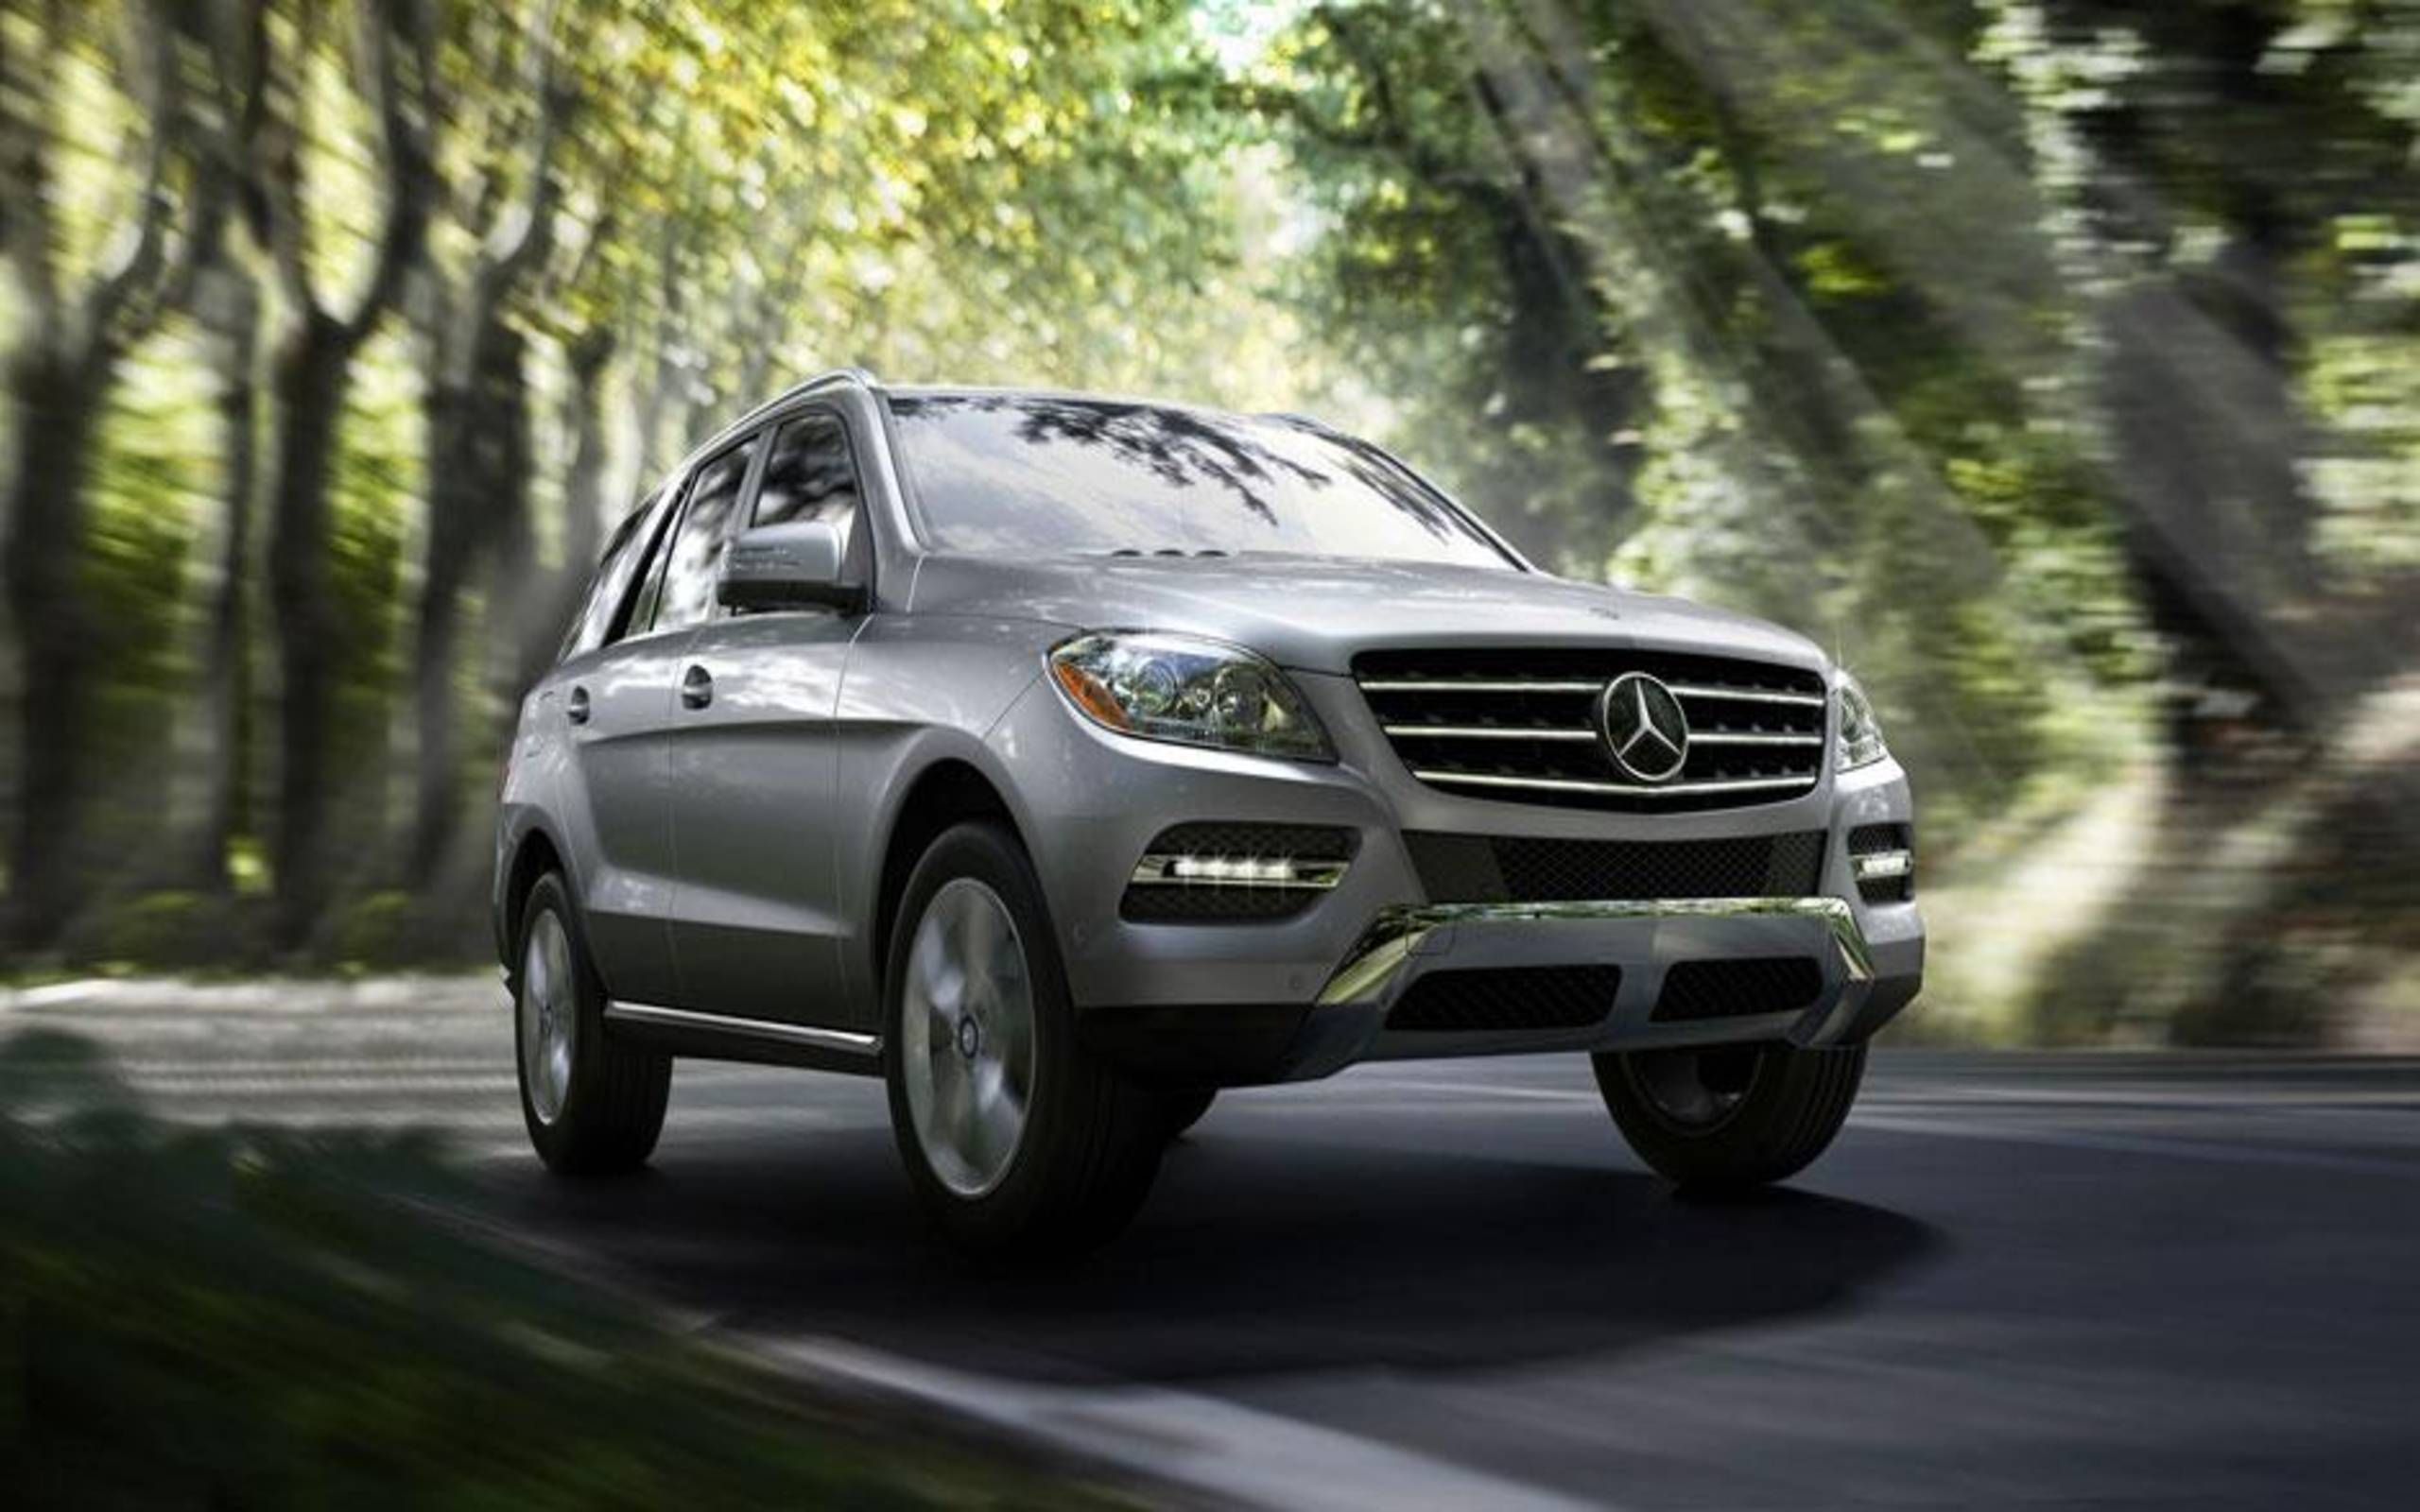 Mercedesbenz Ml350 for Sale  carsguide